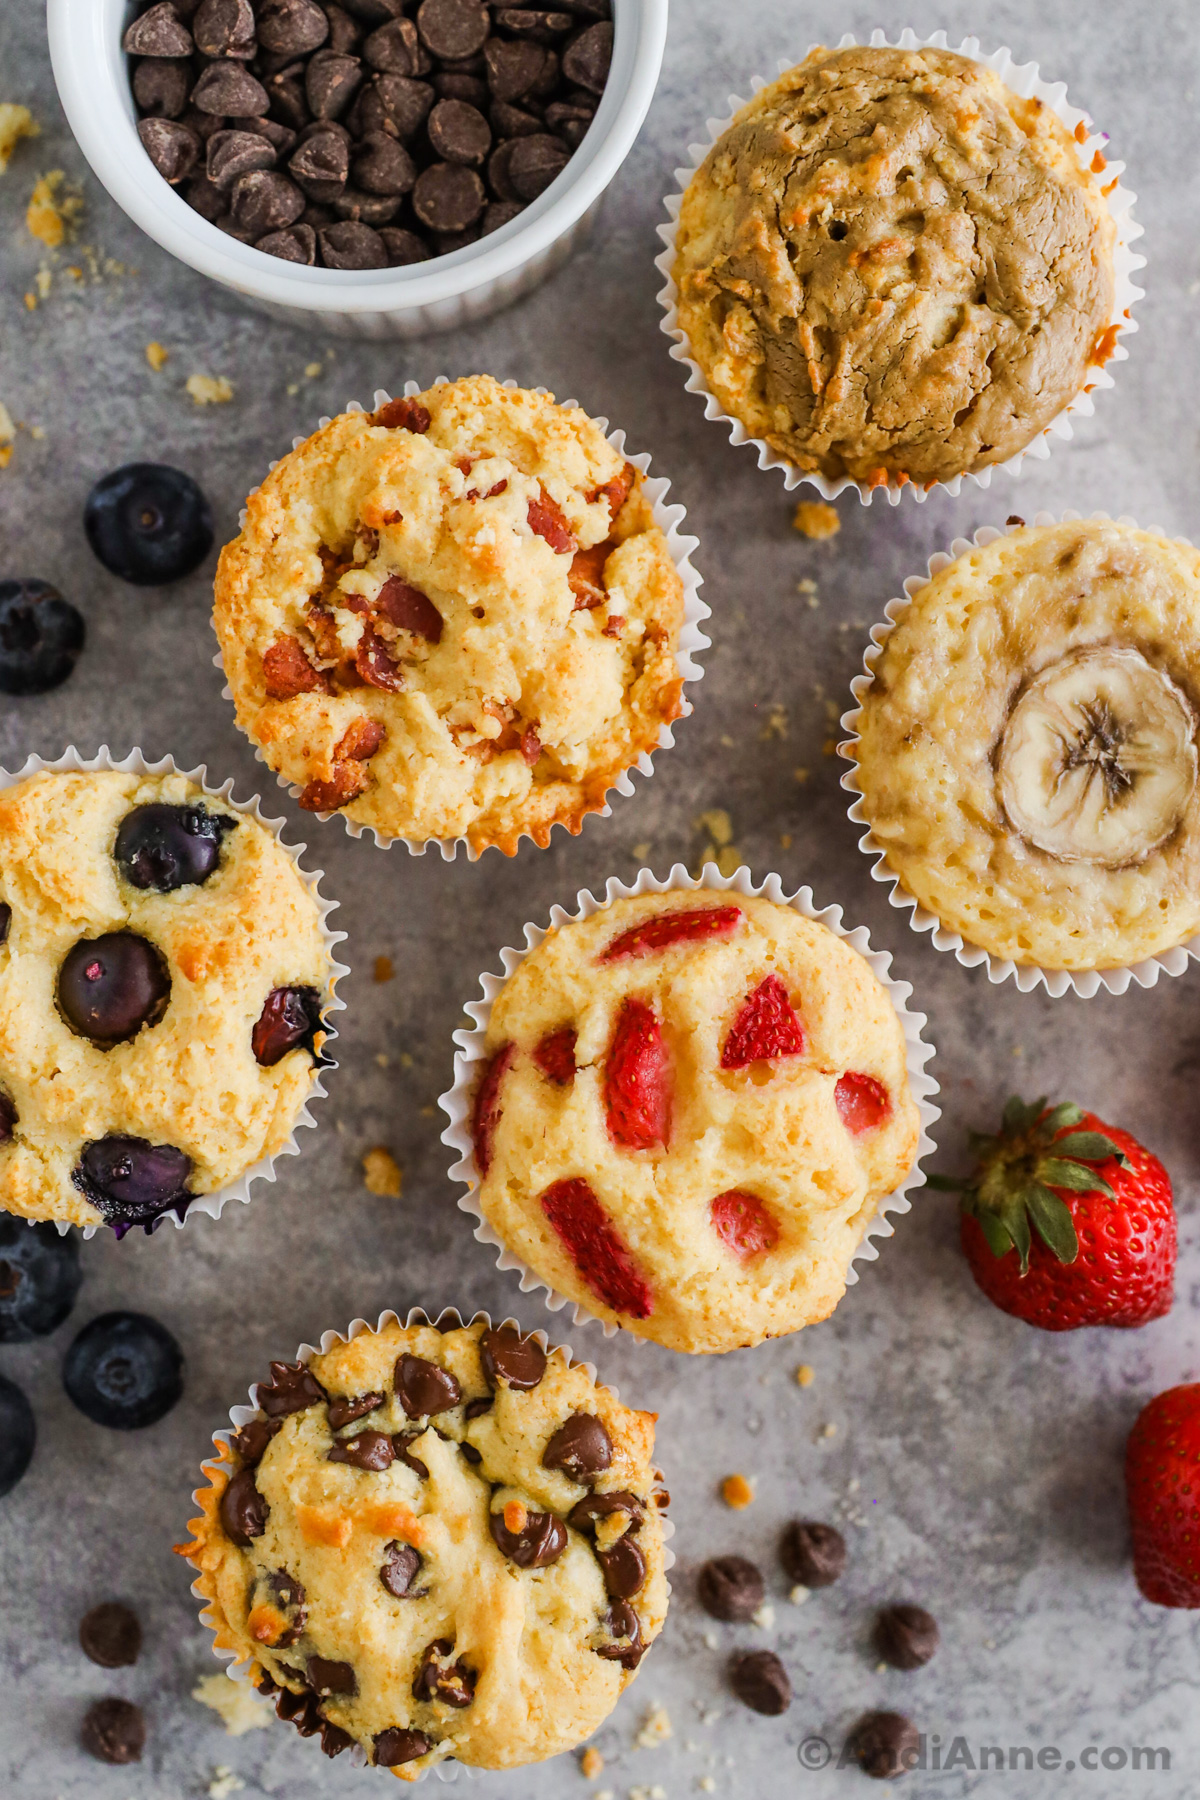 Images of pancake muffins with six different flavor additions including chopped strawberries, blueberries, crumbled bacon and chocolate chips. 